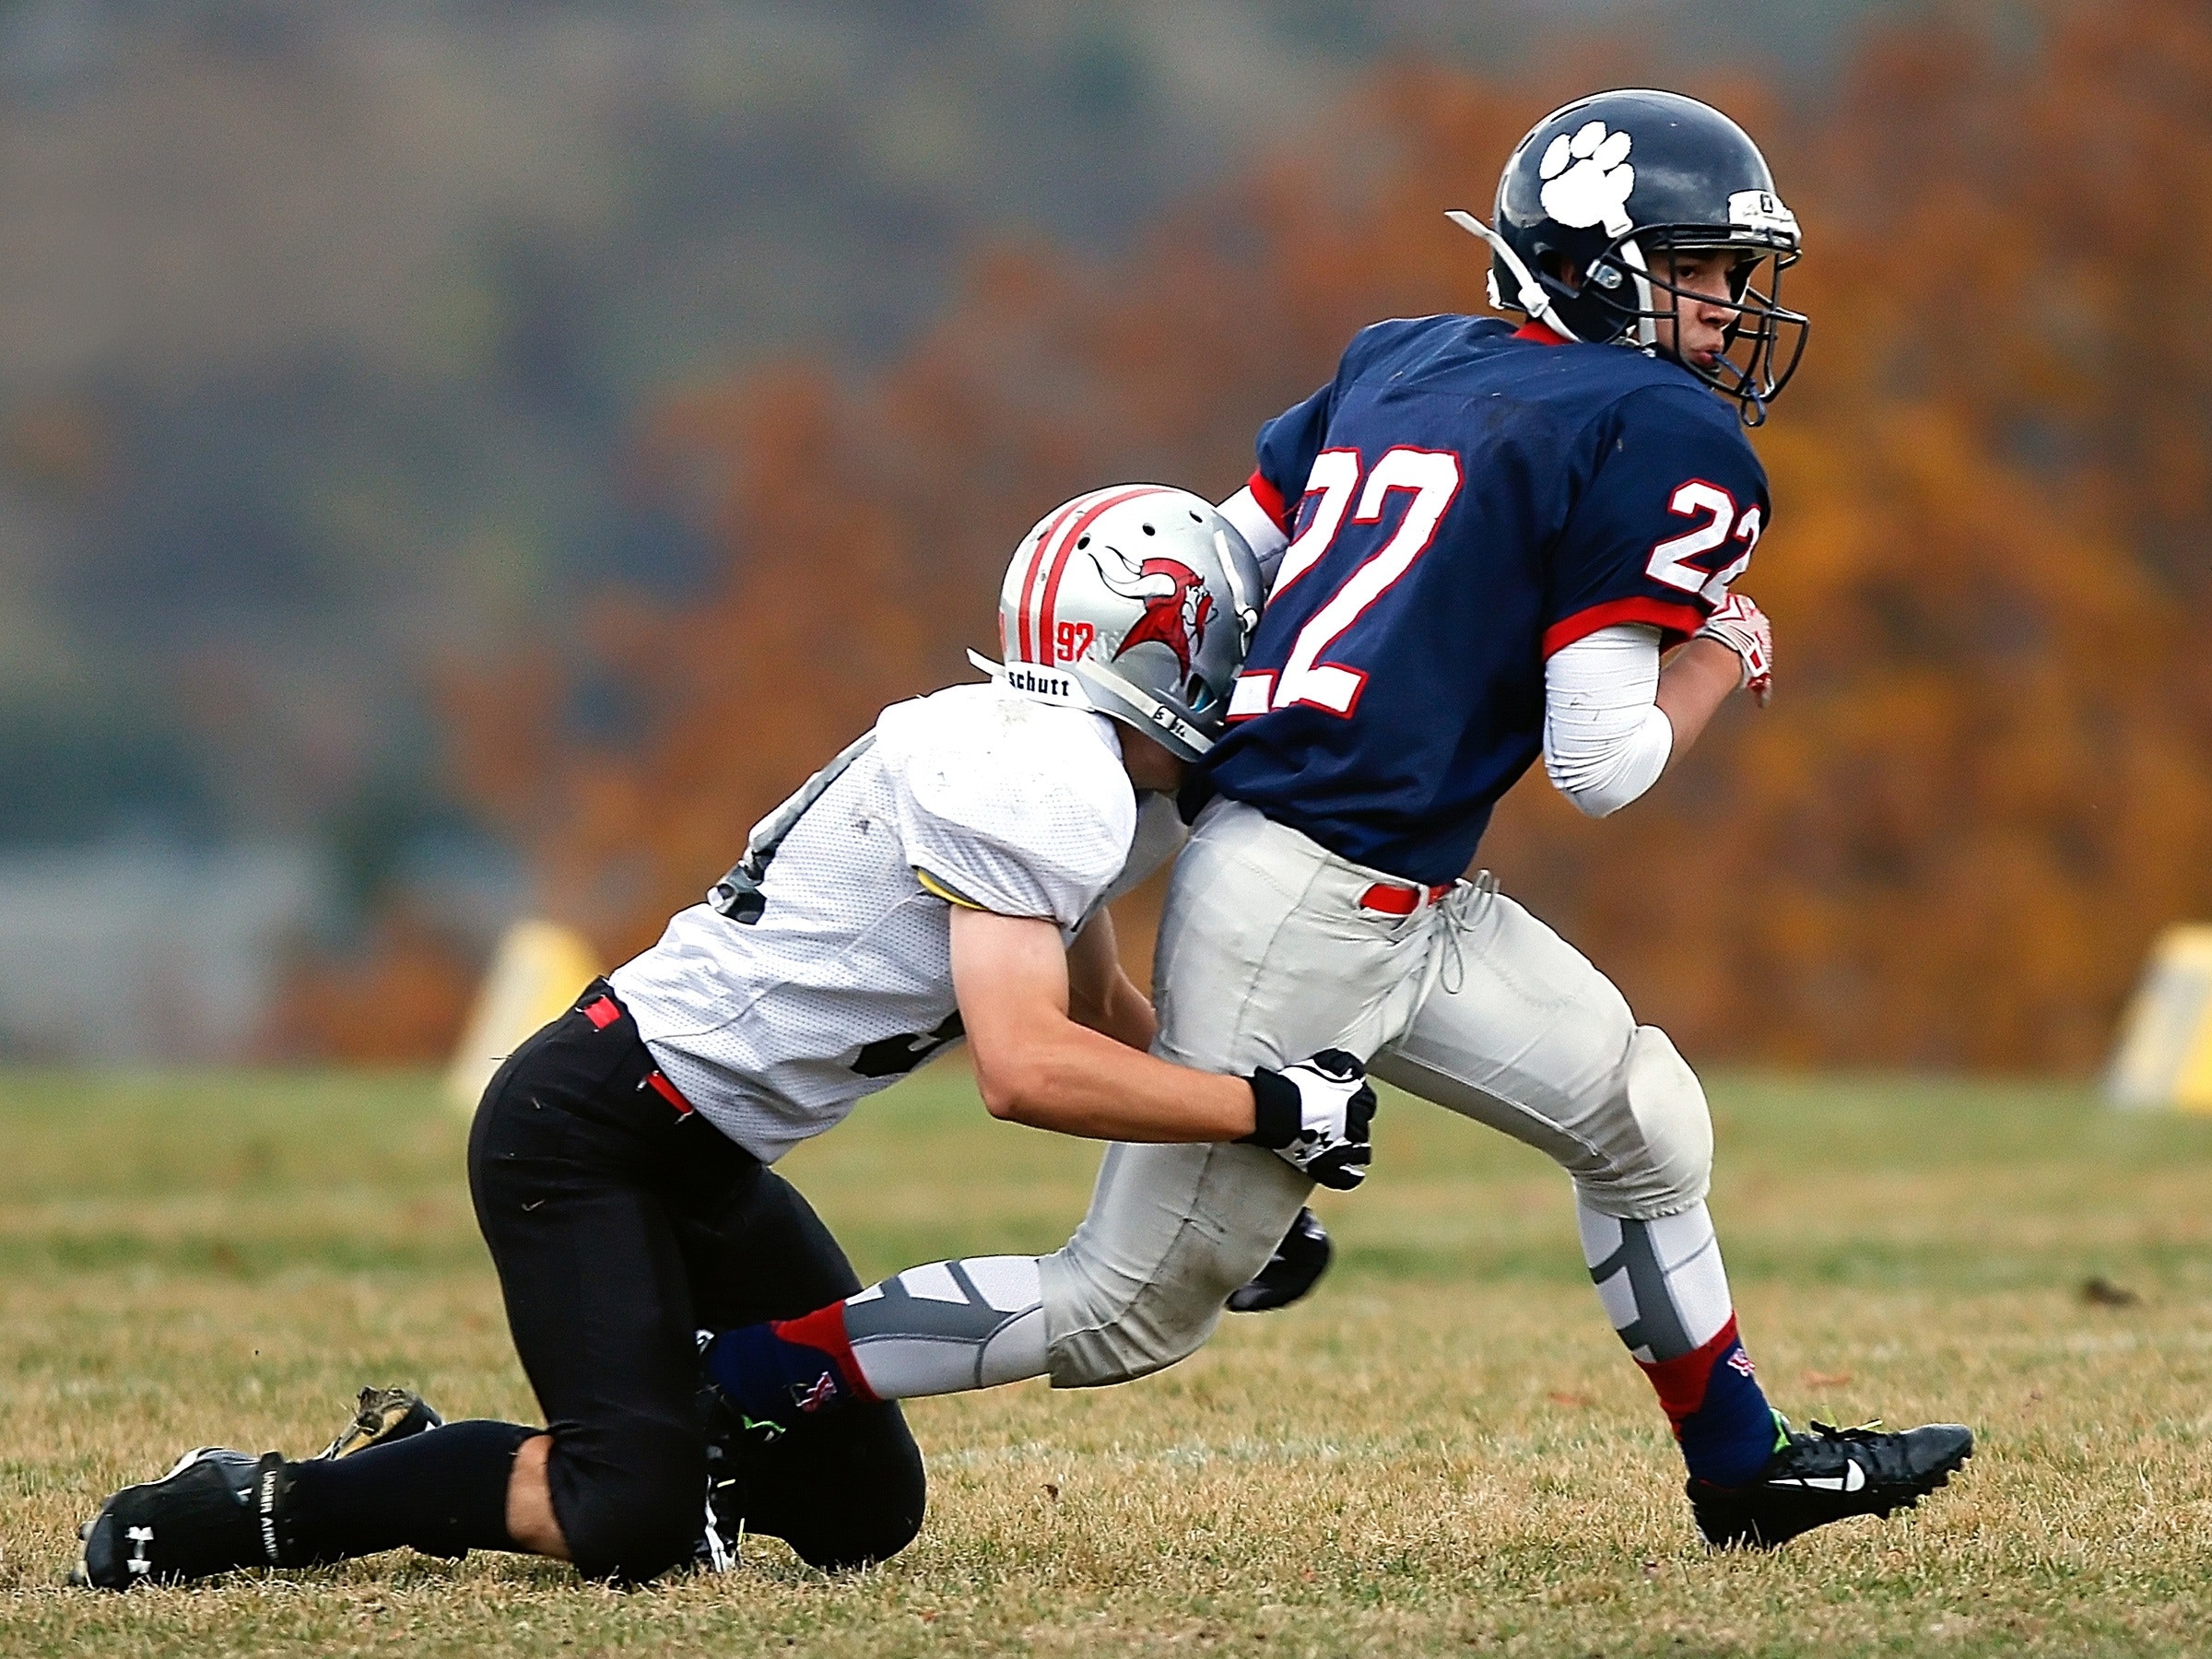 Football player in white trying to stop a player in blue photo